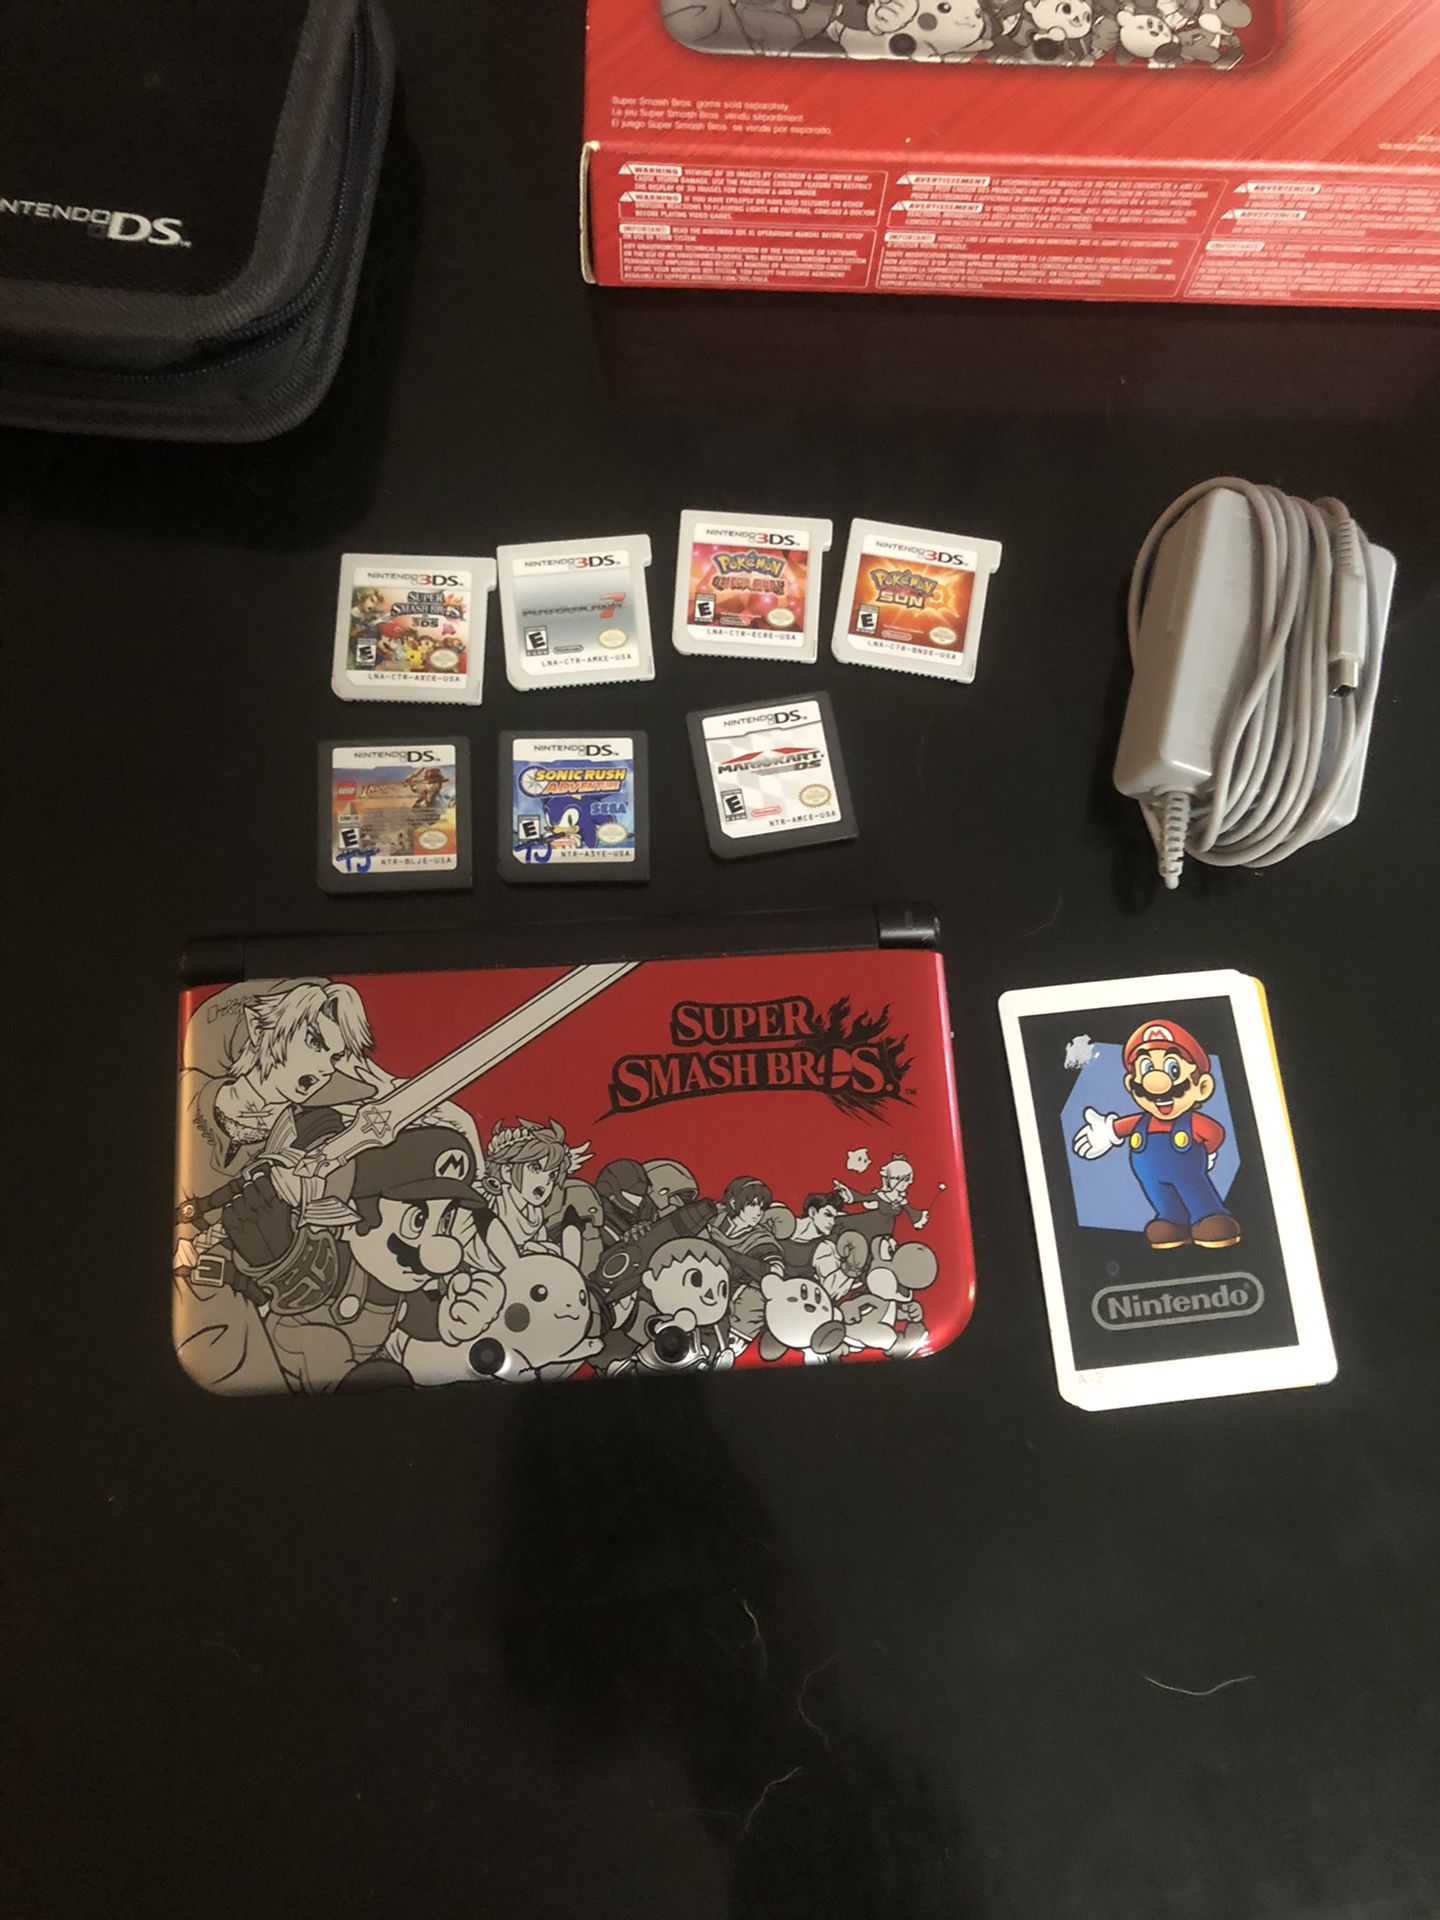 Nintendo 3DS XL Super Smash Bro’s edition with games, case, and box